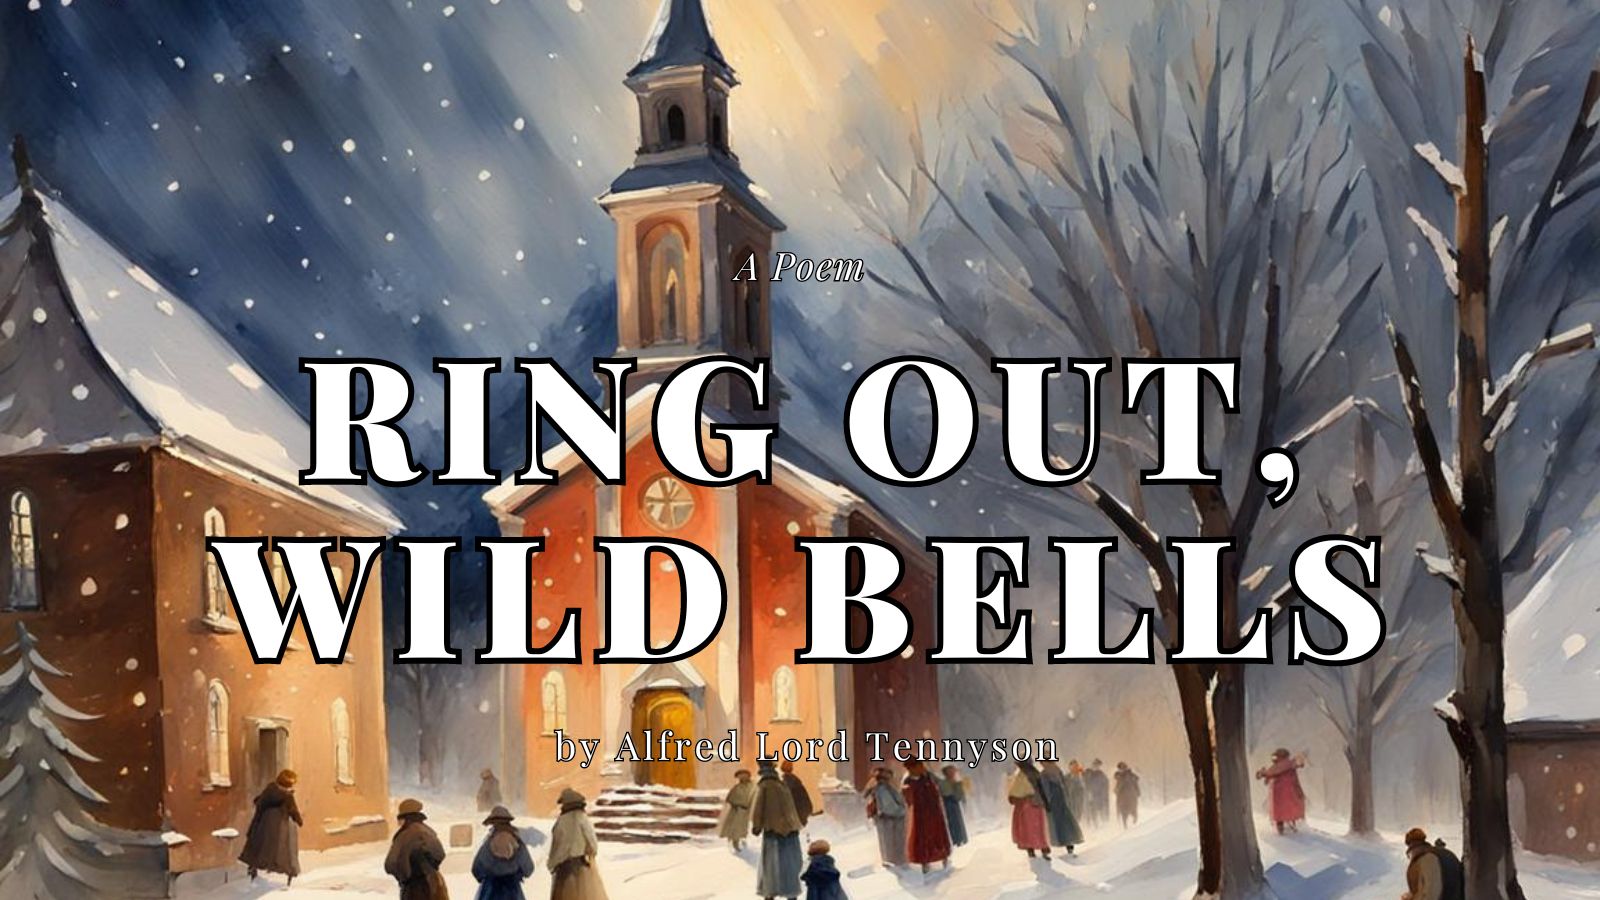 Ring Out, Wild Bells by Alfred Lord Tennyson